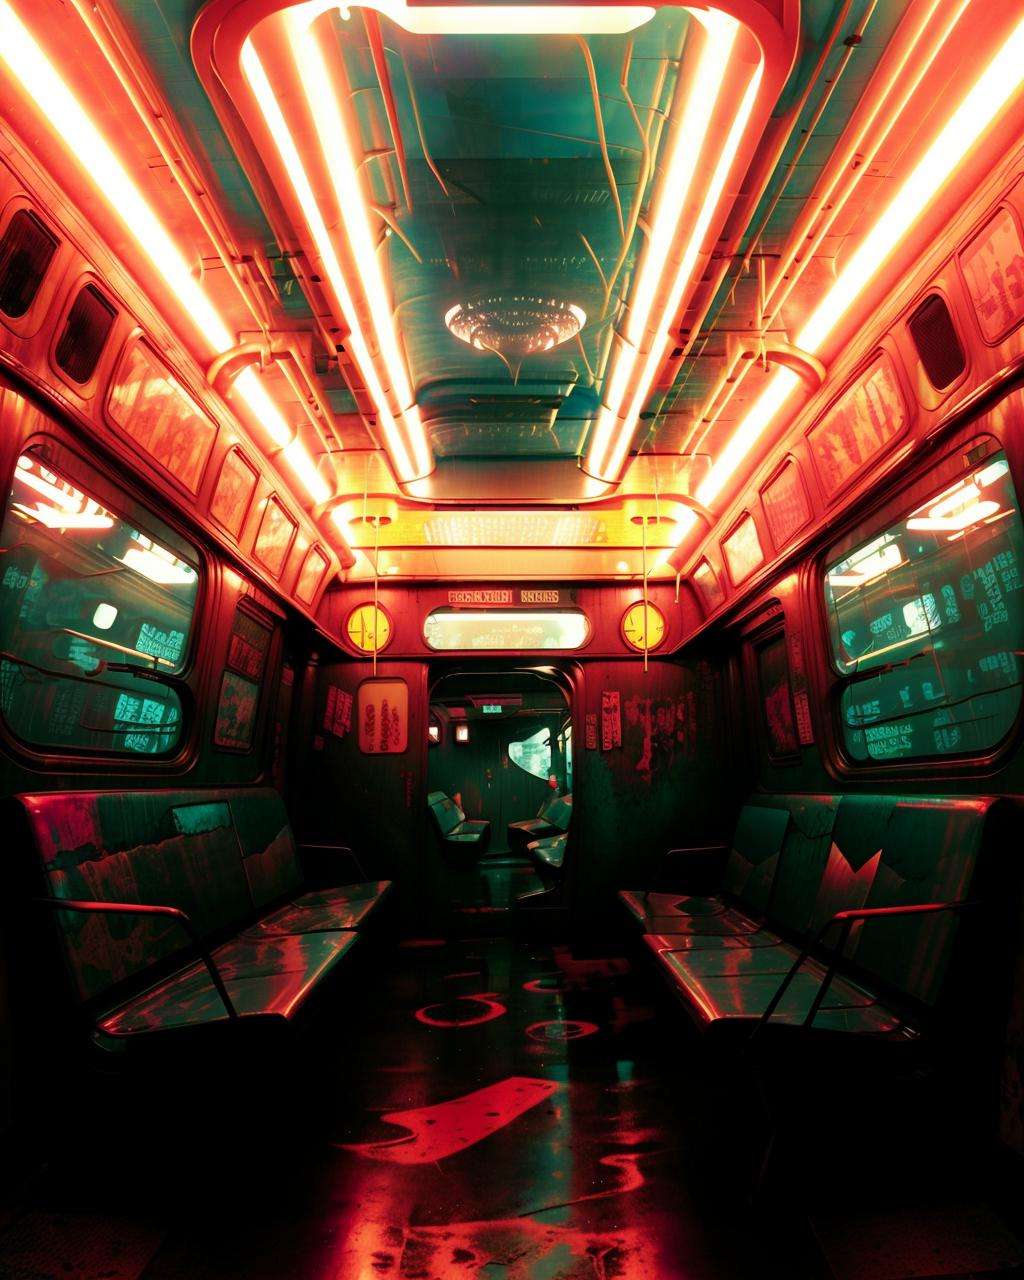 a subway car with a lot of seats and a window with a view of the city, Elsa Bleda, cyberpunk style, cyberpunk art, photorealism, -A hauntingly beautiful underwater scene, with a mermaid-like creature swimming among coral reefs and schools of fish. Realistic lighting and textures create a mesmerizing atmosphere.